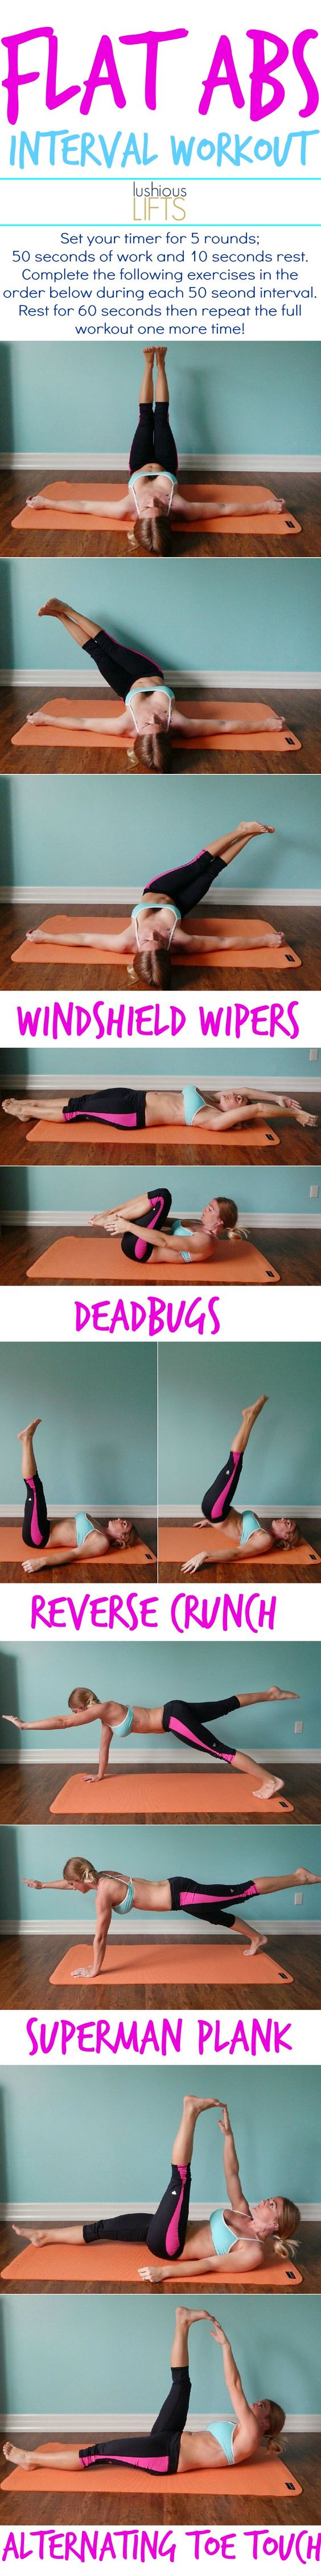 14 Flat Belly Fat Burning Workouts That Will Help You Lose Weight ...